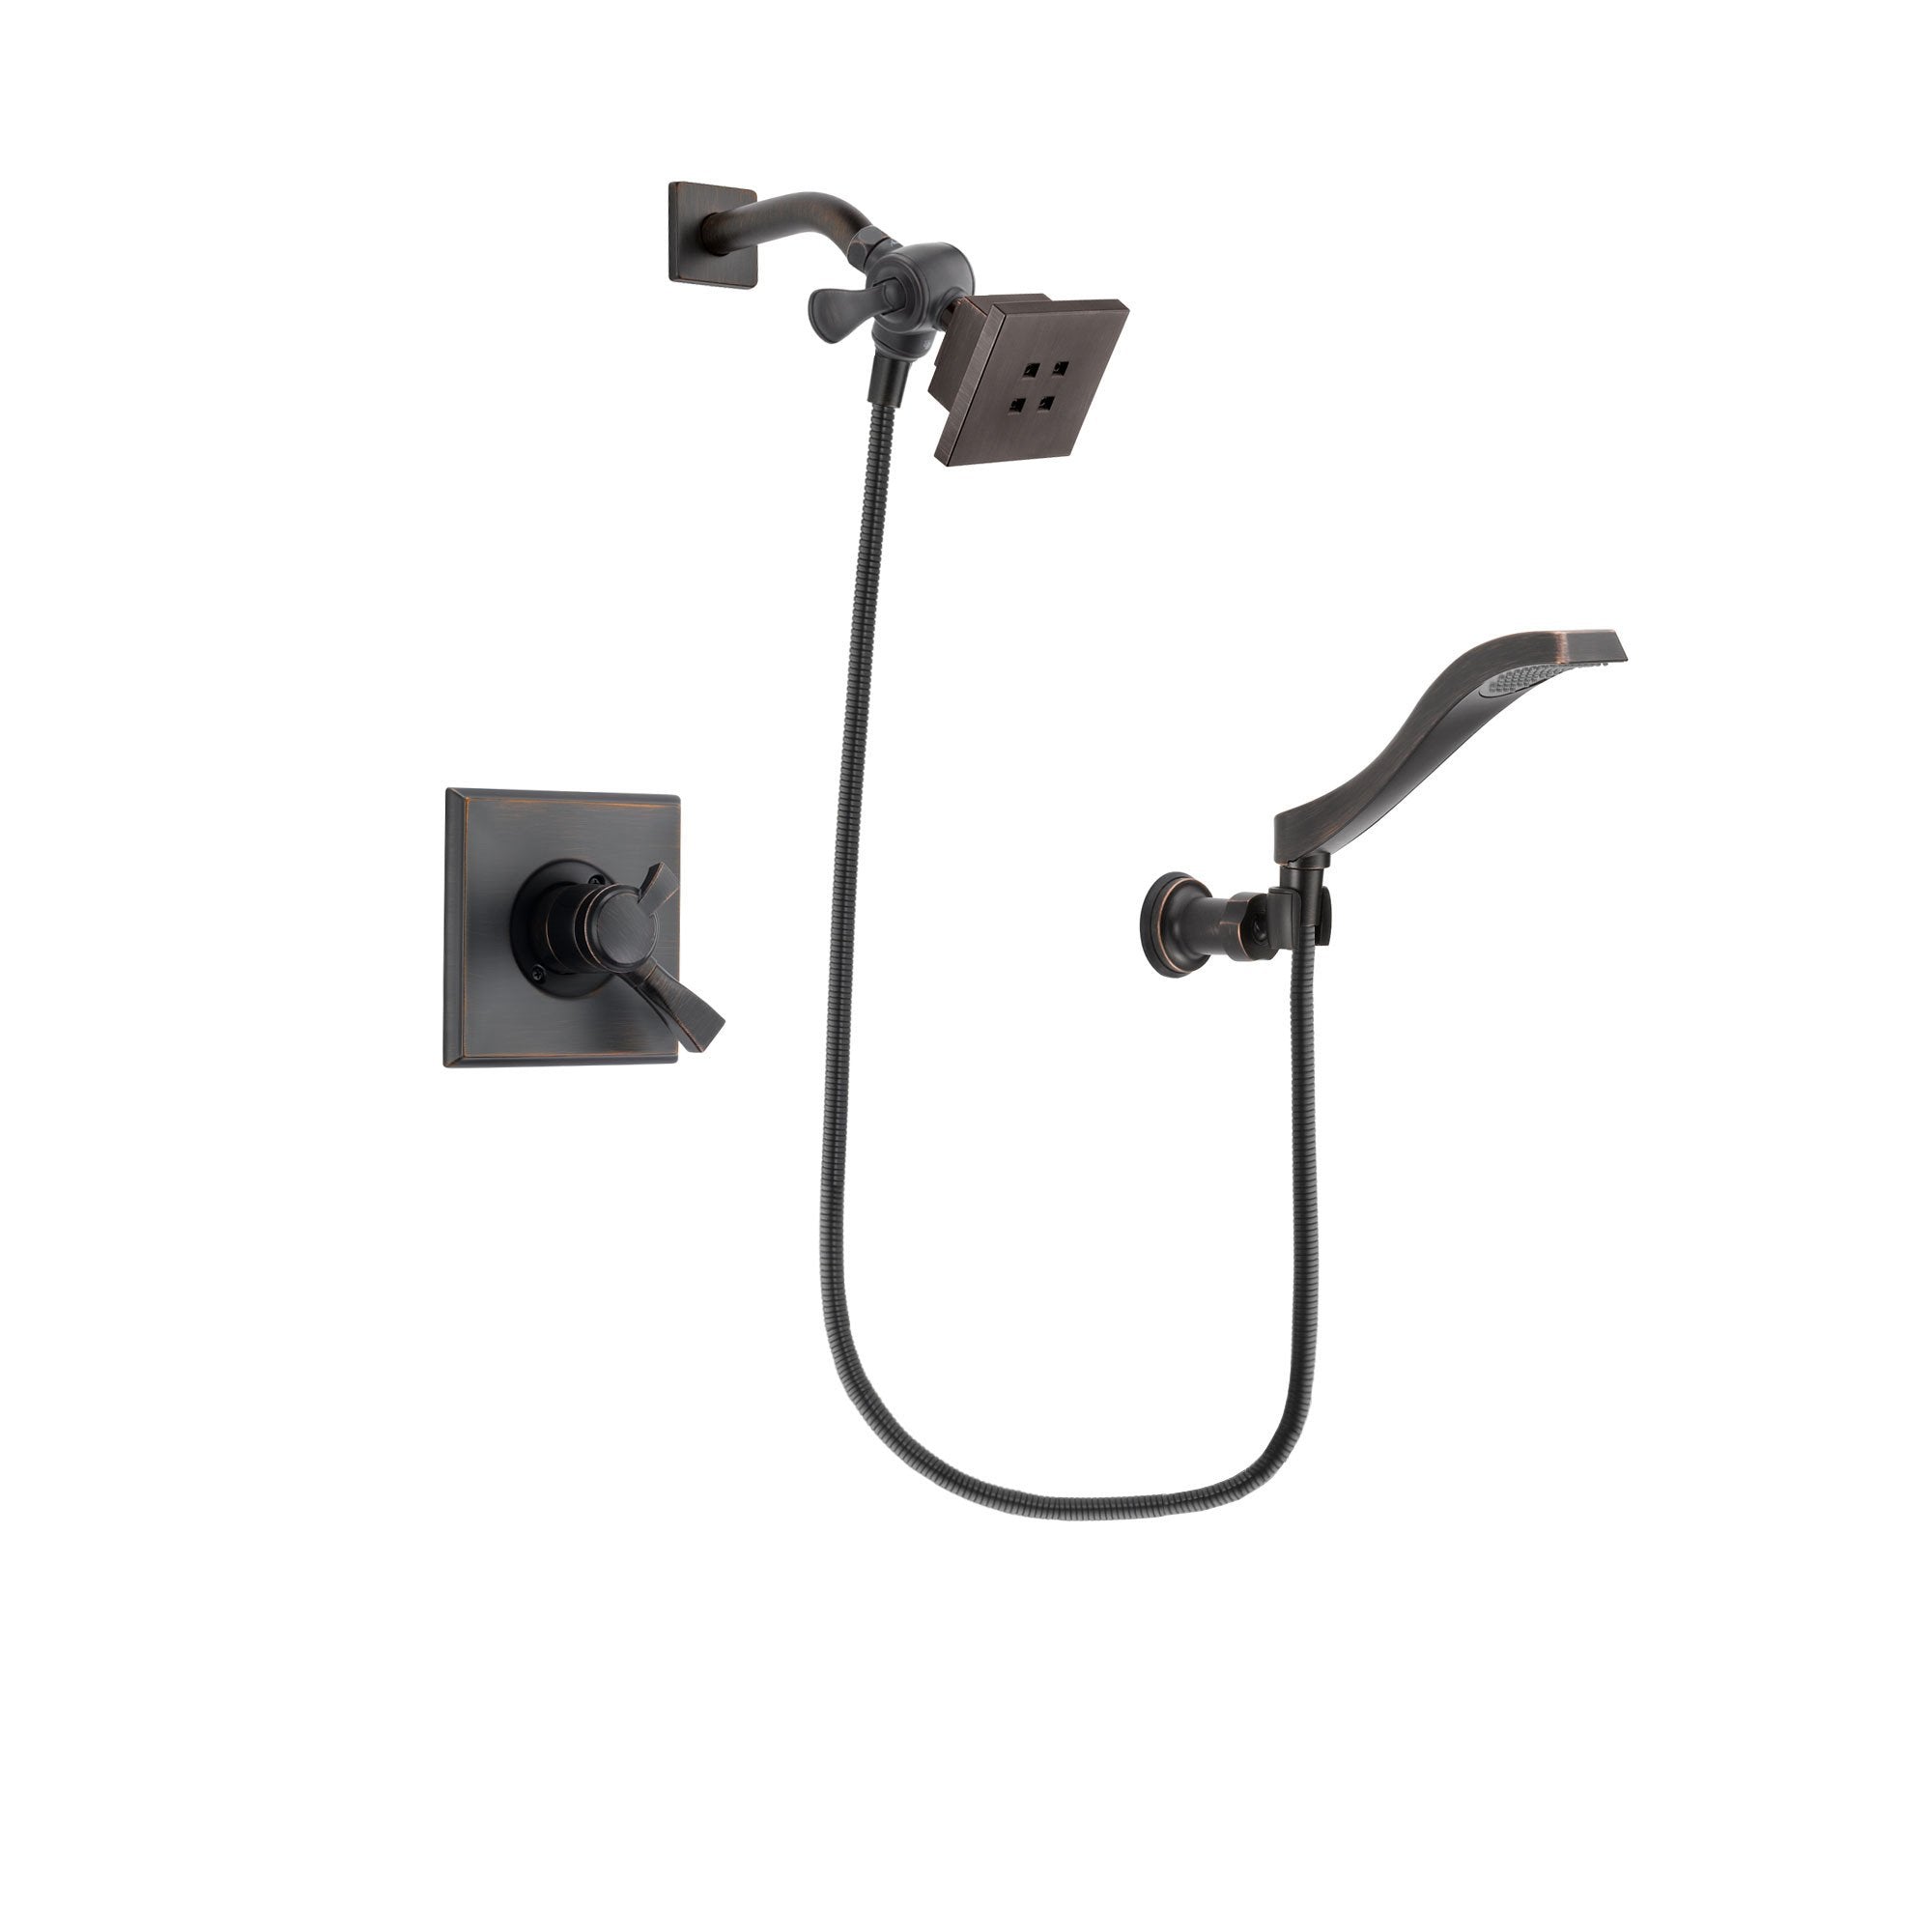 Delta Dryden Venetian Bronze Finish Dual Control Shower Faucet System Package with Square Showerhead and Modern Wall Mount Handheld Shower Spray Includes Rough-in Valve DSP3218V